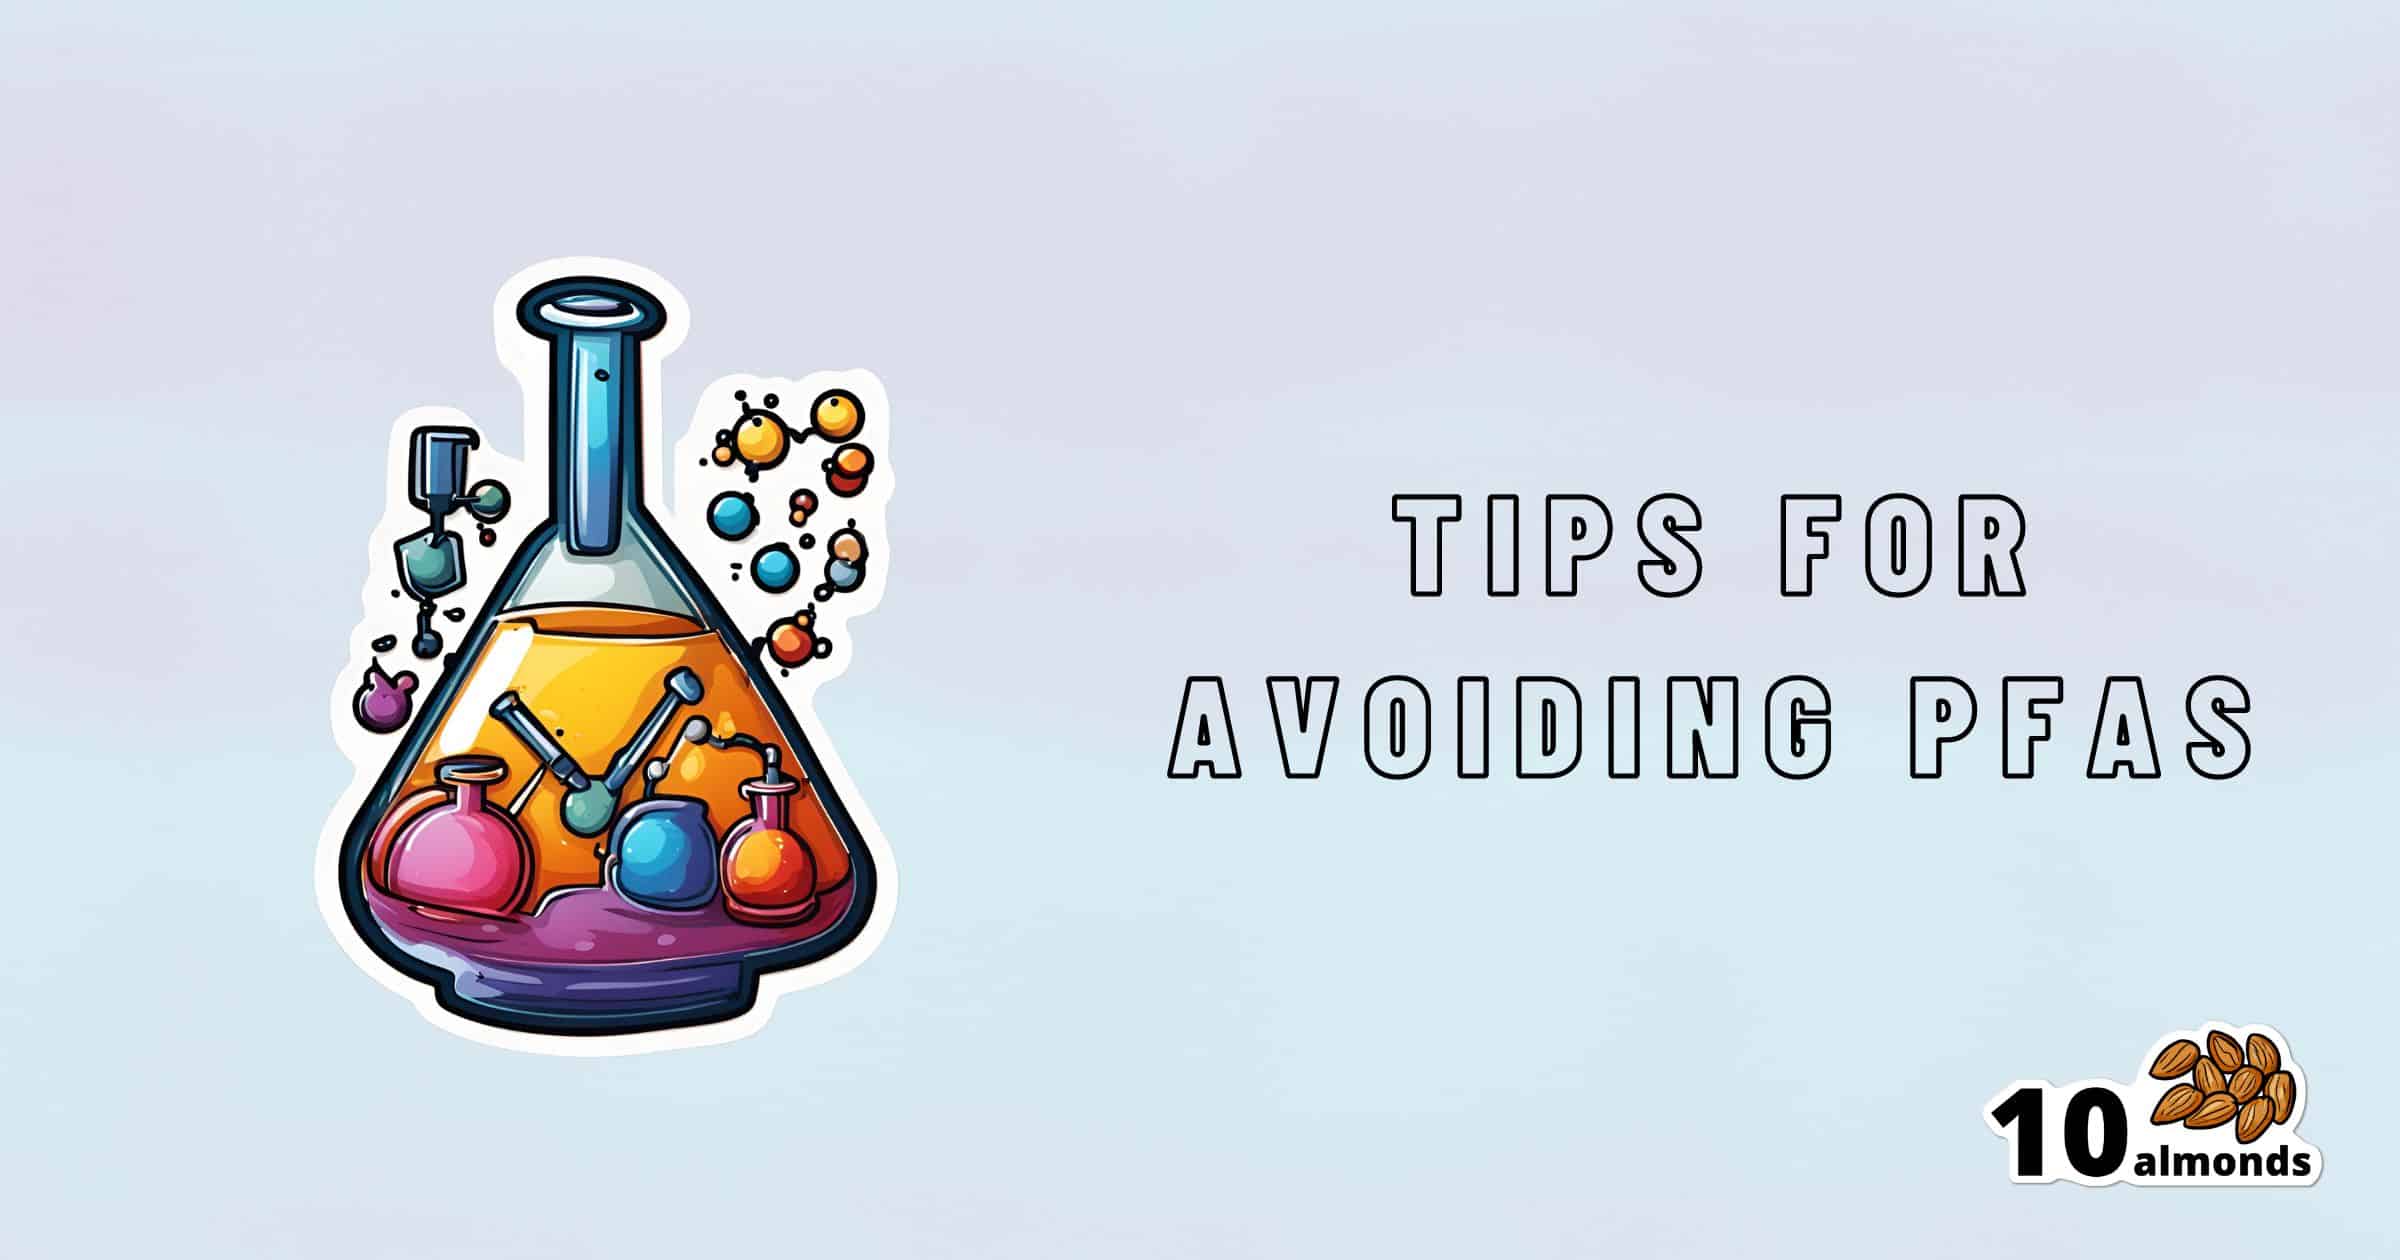 A graphic of a chemistry flask with colorful liquids and chemical symbols next to text that reads "Tips for Avoiding PFAs." The bottom right corner features an image of ten almonds and the text "10 almonds." The background is light gray, optimized with SEO keywords: PFAs.